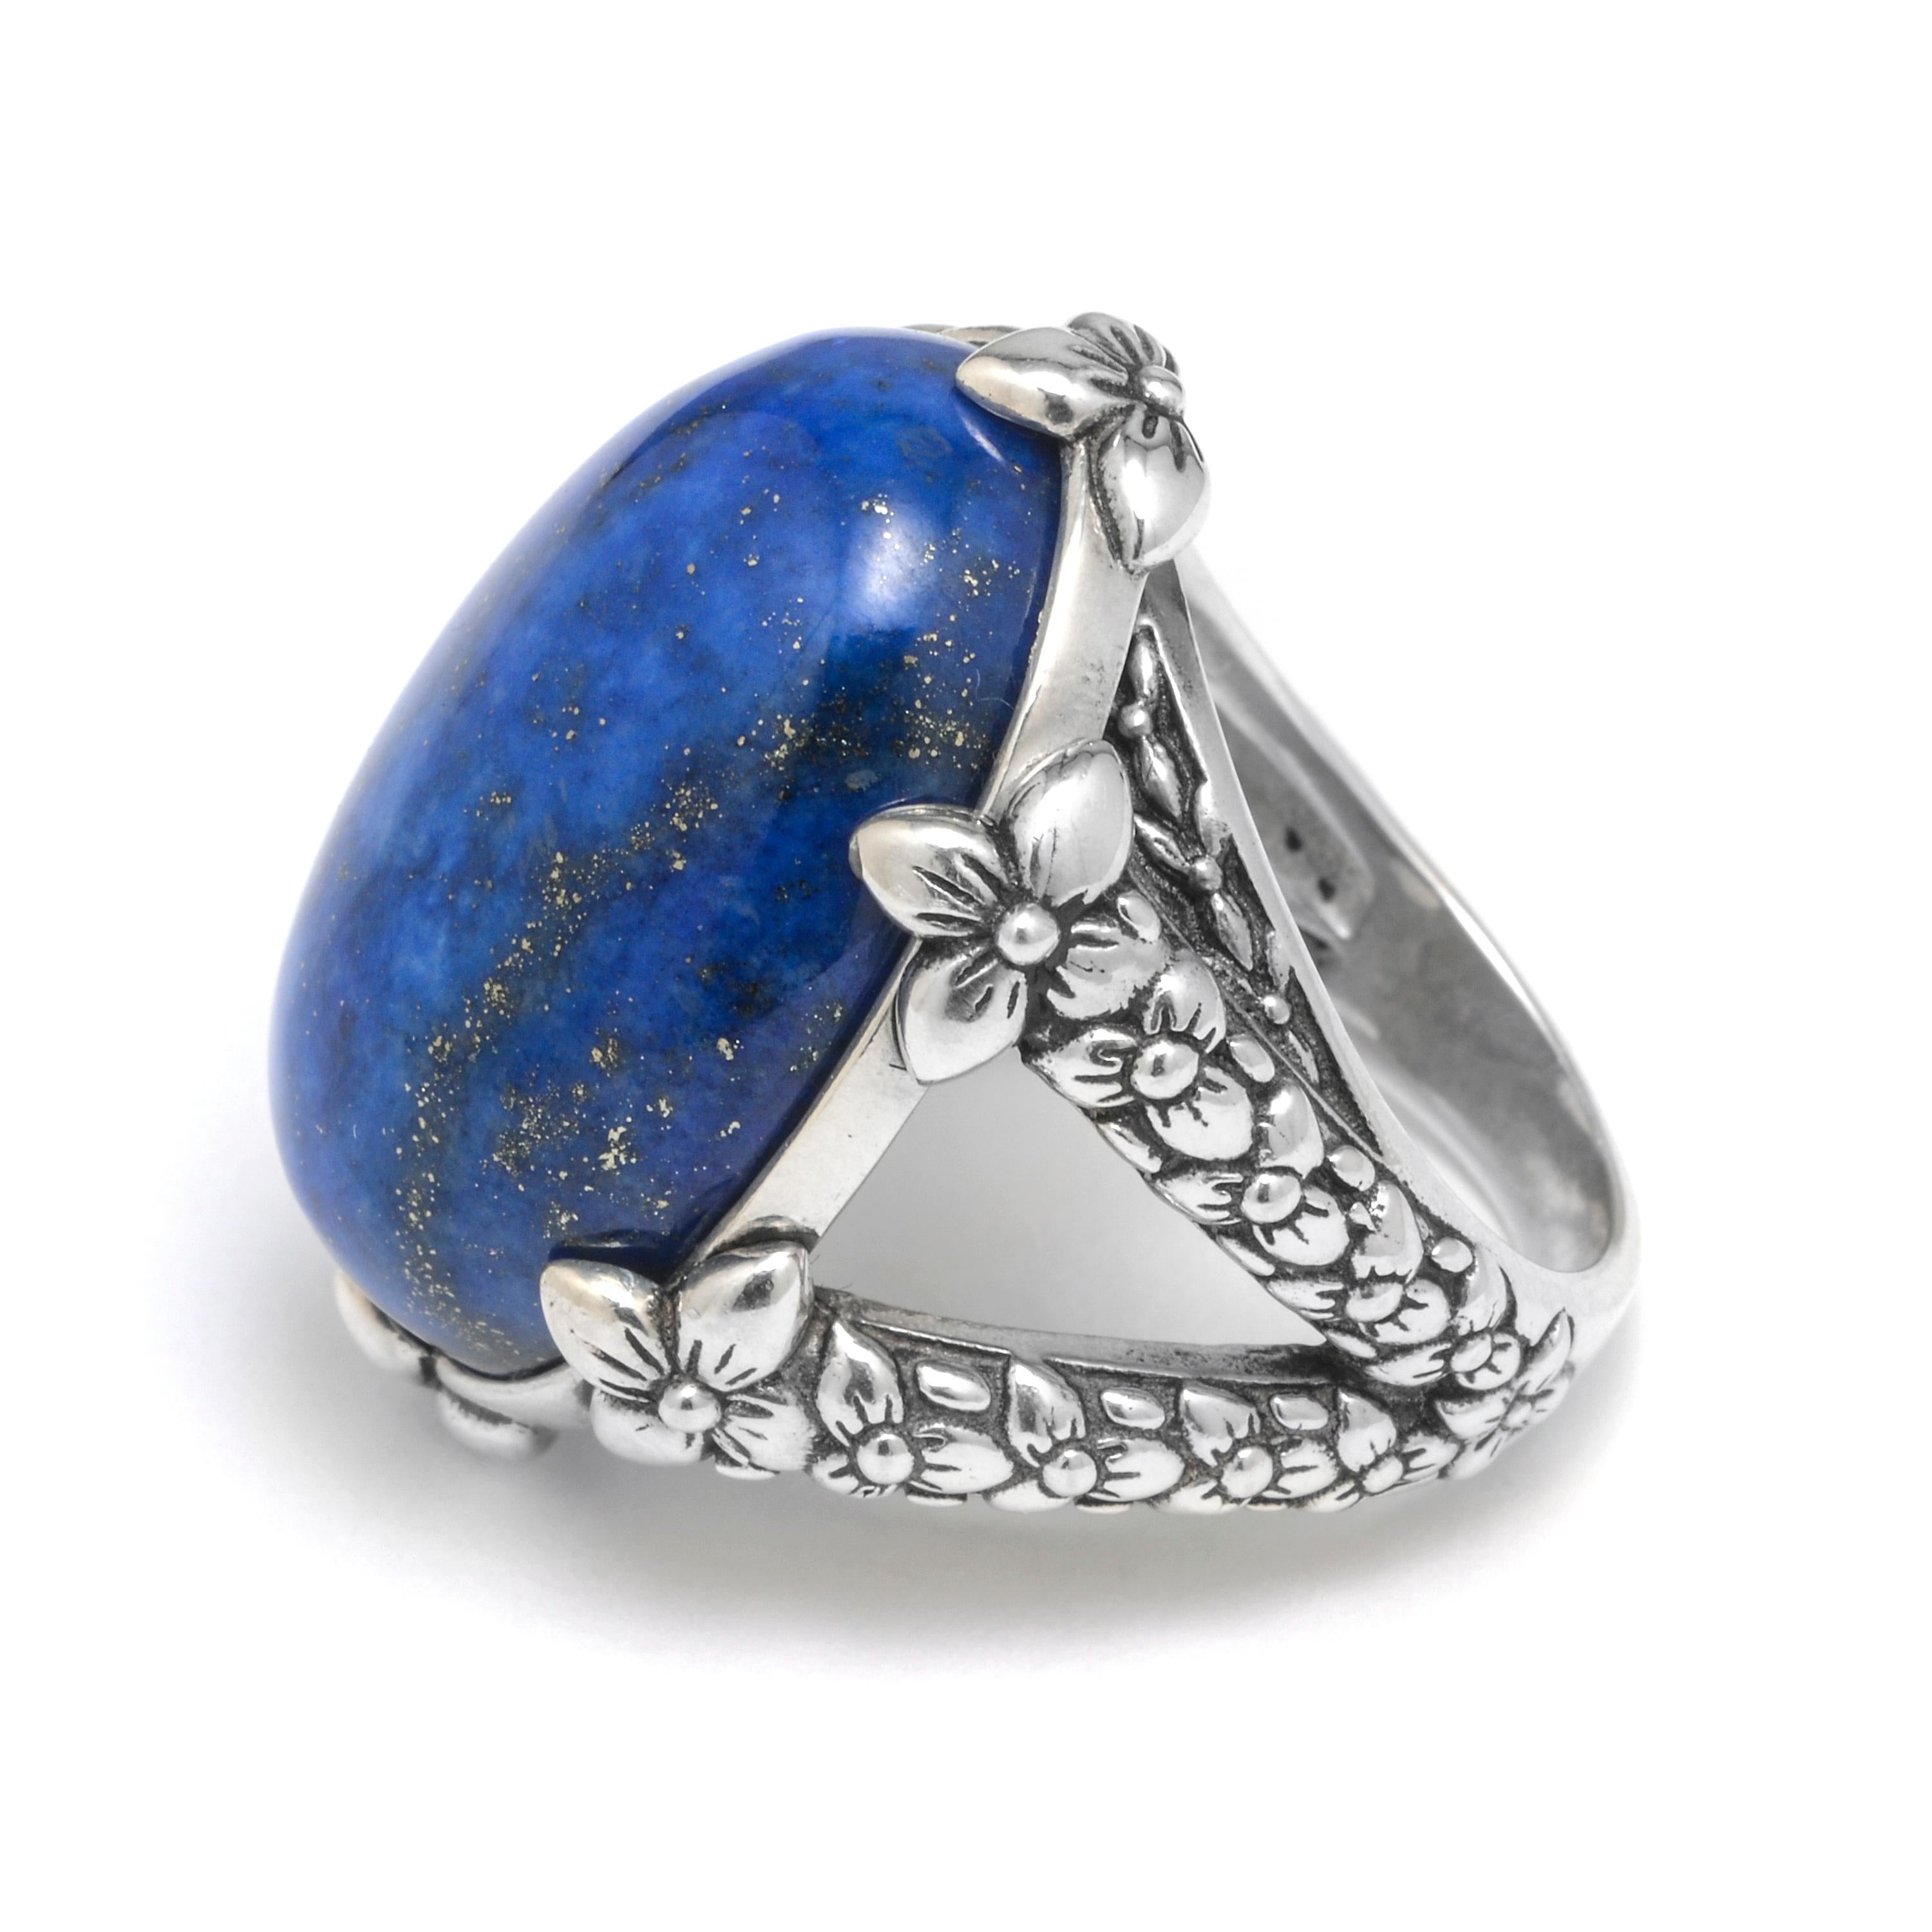 This bold Stephen Dweck Sterling Silver Statement Ring features a vibrant Blue Lapis cabochon (18mm x 26mm) held by floral shanks of sterling silver. Drawing inspiration from a love of nature and passion for art, each Stephen Dweck creation is a